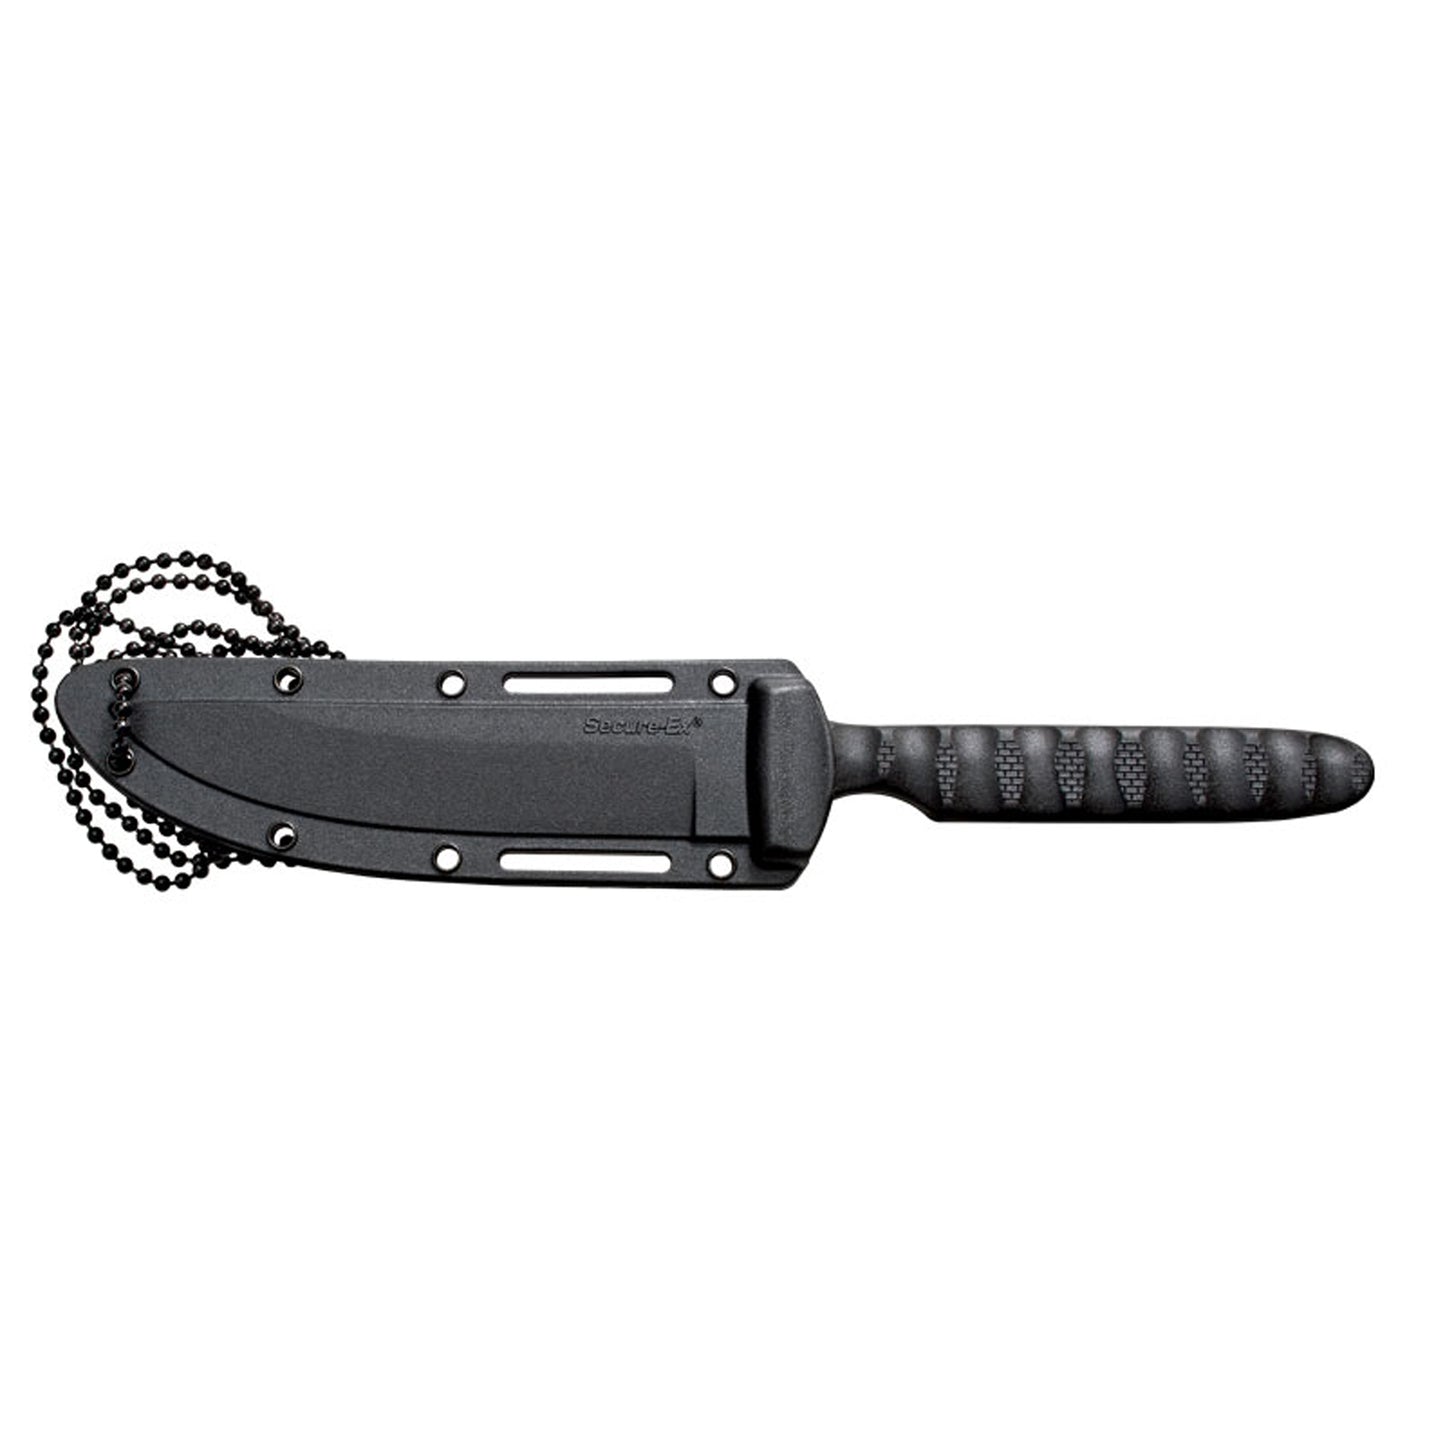 Cold Steel Tanto Spike 8" Fixed Blade Knife 4116 Steel CS-53NCT - California Shooting Supplies